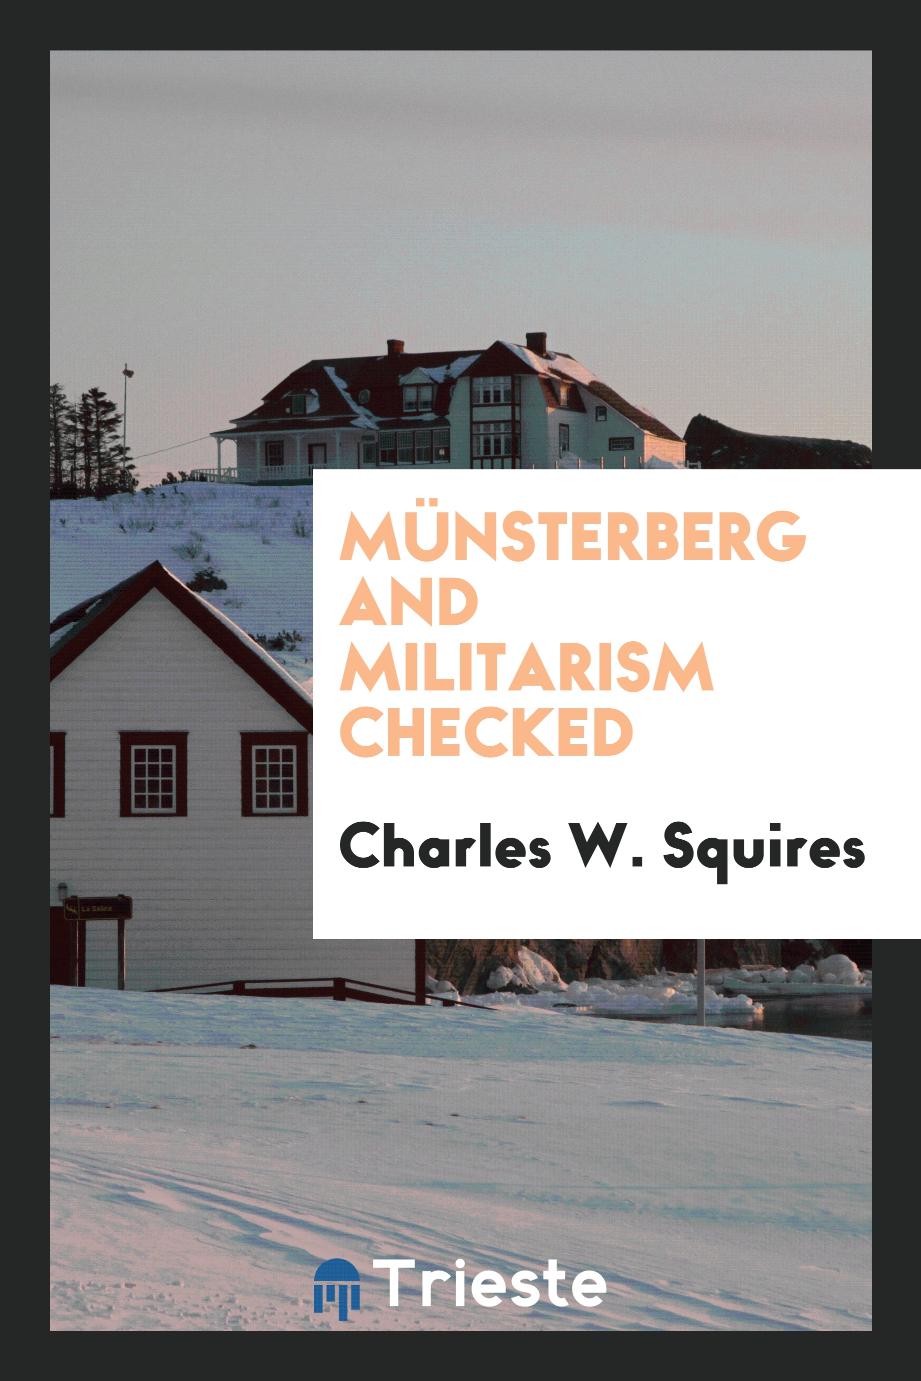 Münsterberg and militarism checked